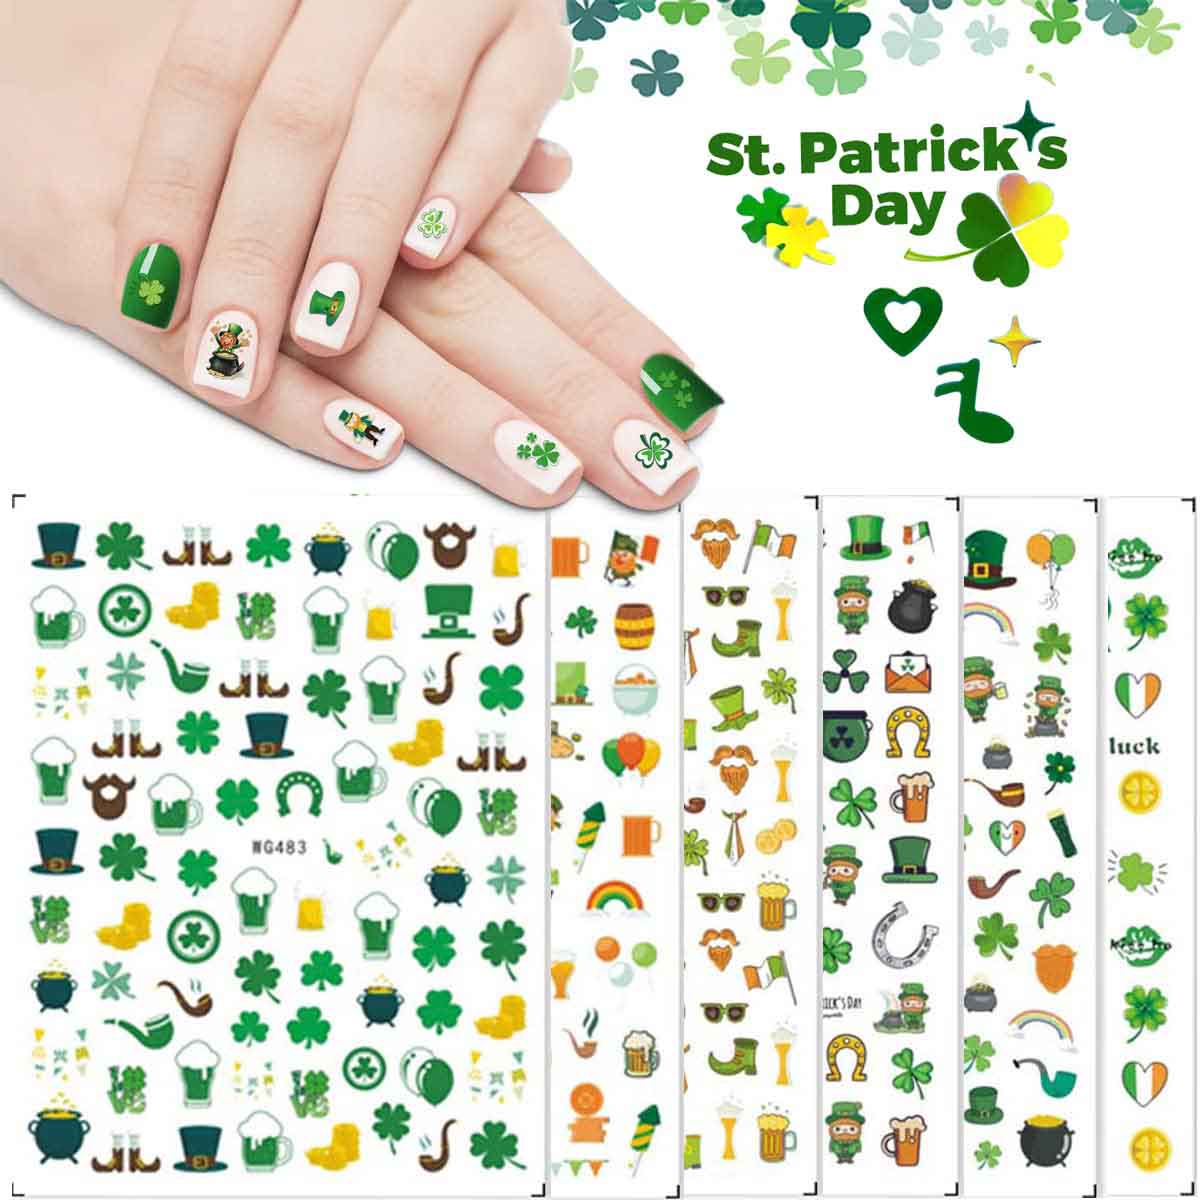 six sheet of St. Patrick's Day Nail Art Stickers Decals 